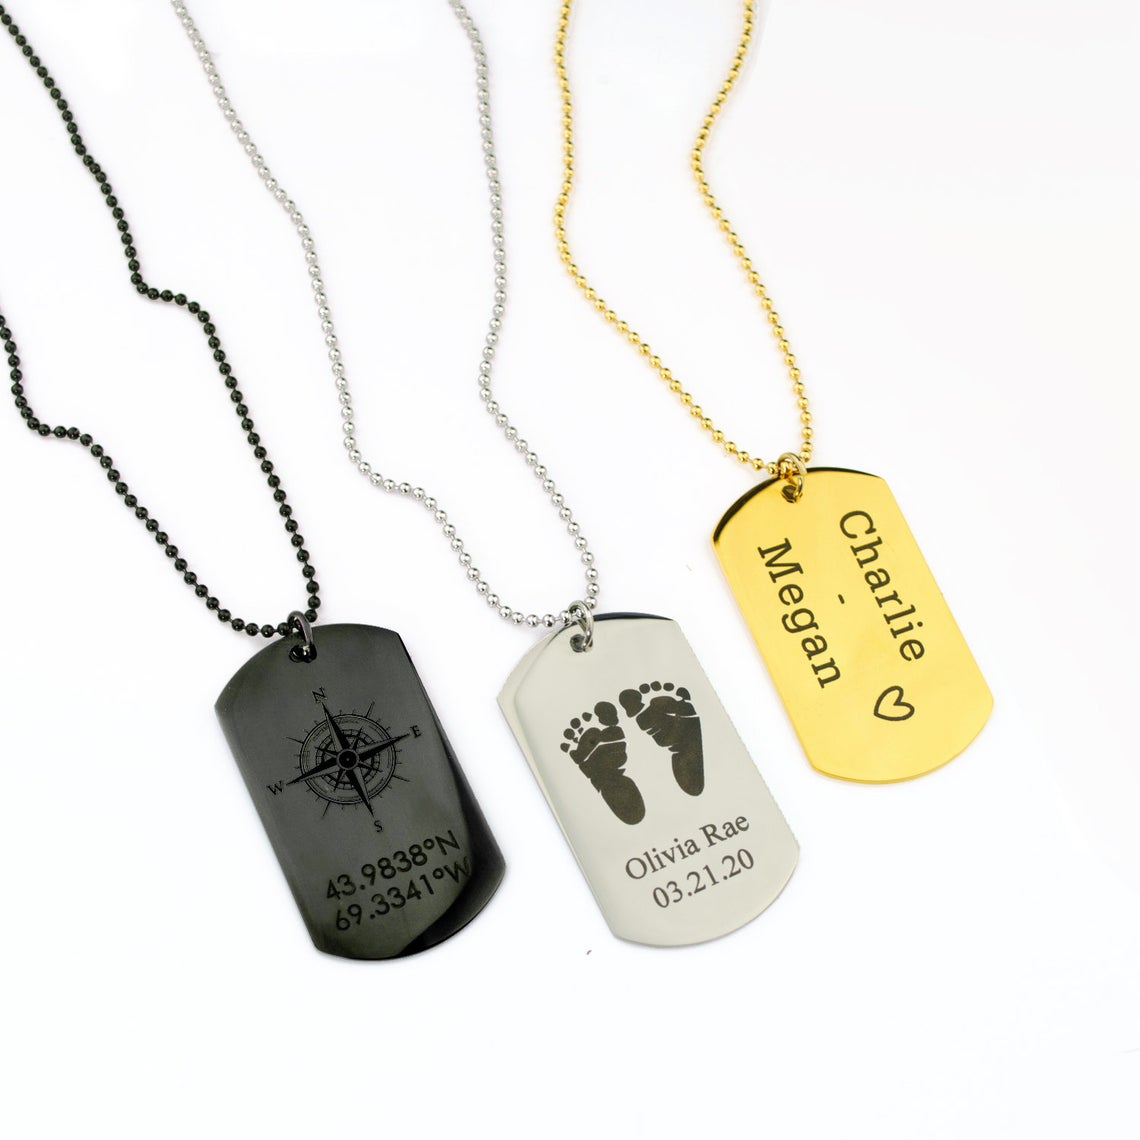 Dog Tags Necklace, Men's Pendants,Stainless Steel Dog Tag Necklaces For Men  Gift